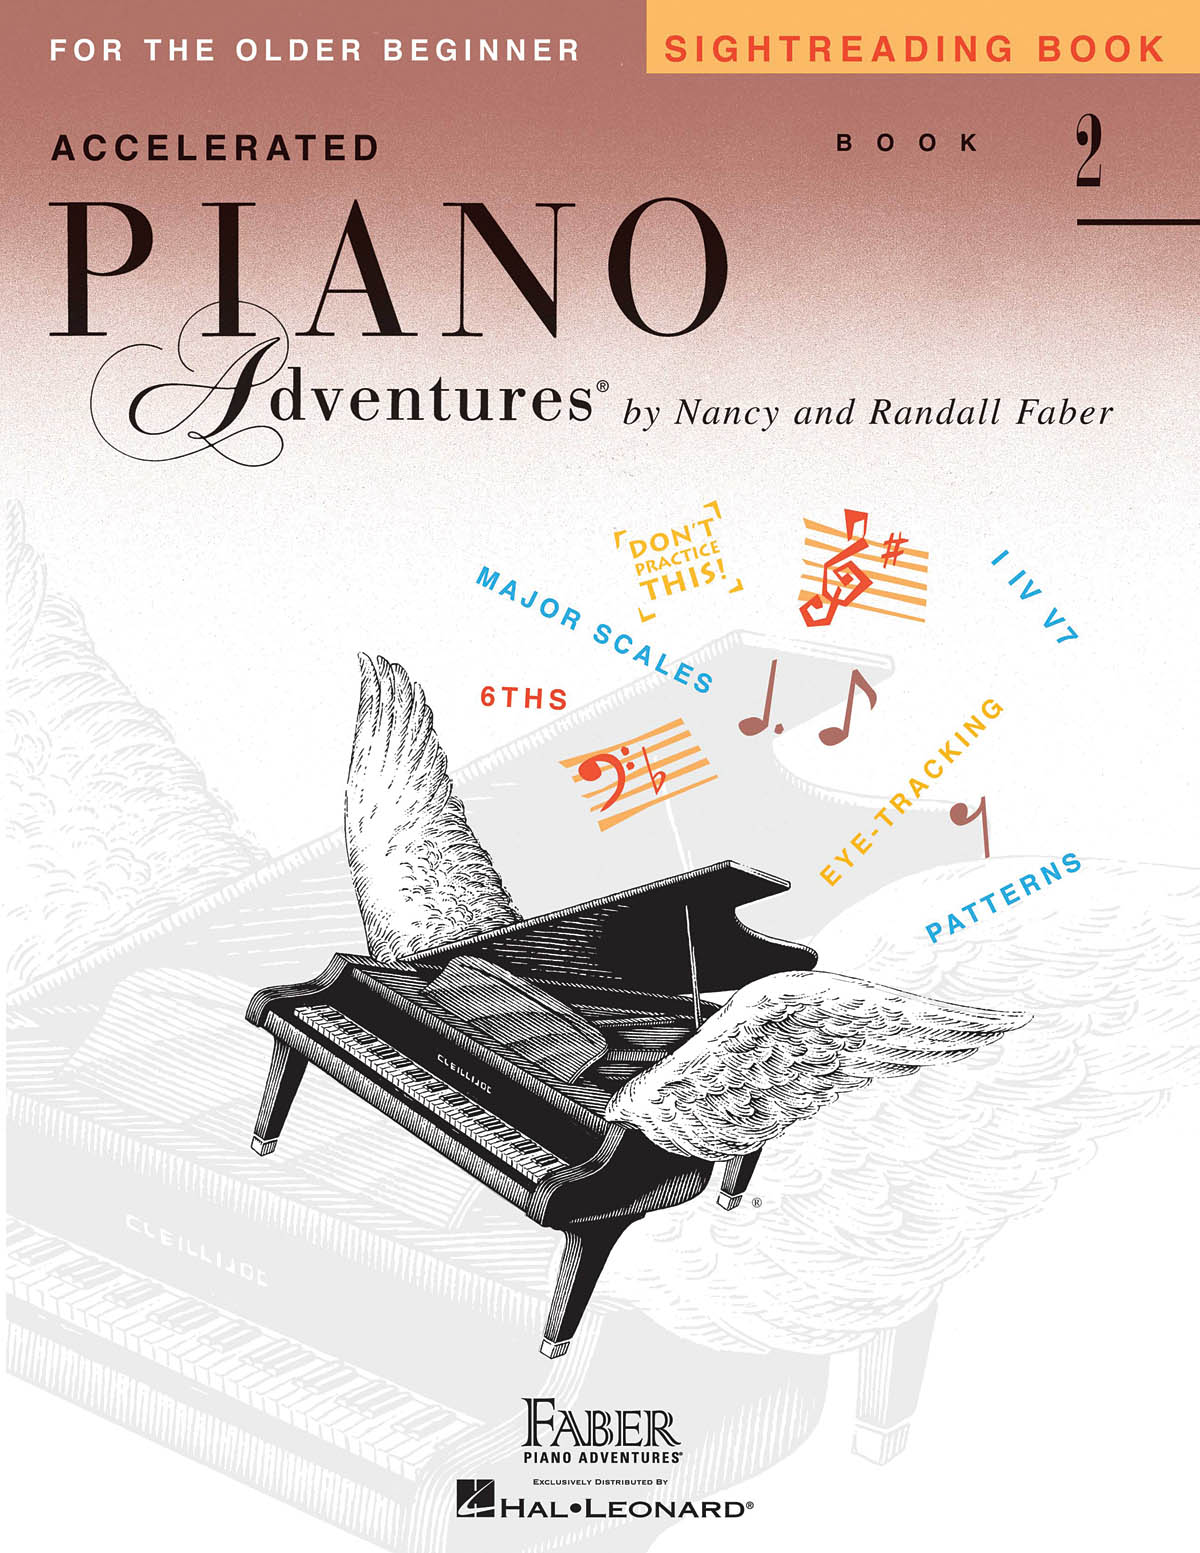 Nancy Faber Randall Faber: Accelerated Piano Adventures Sightreading Book 2: